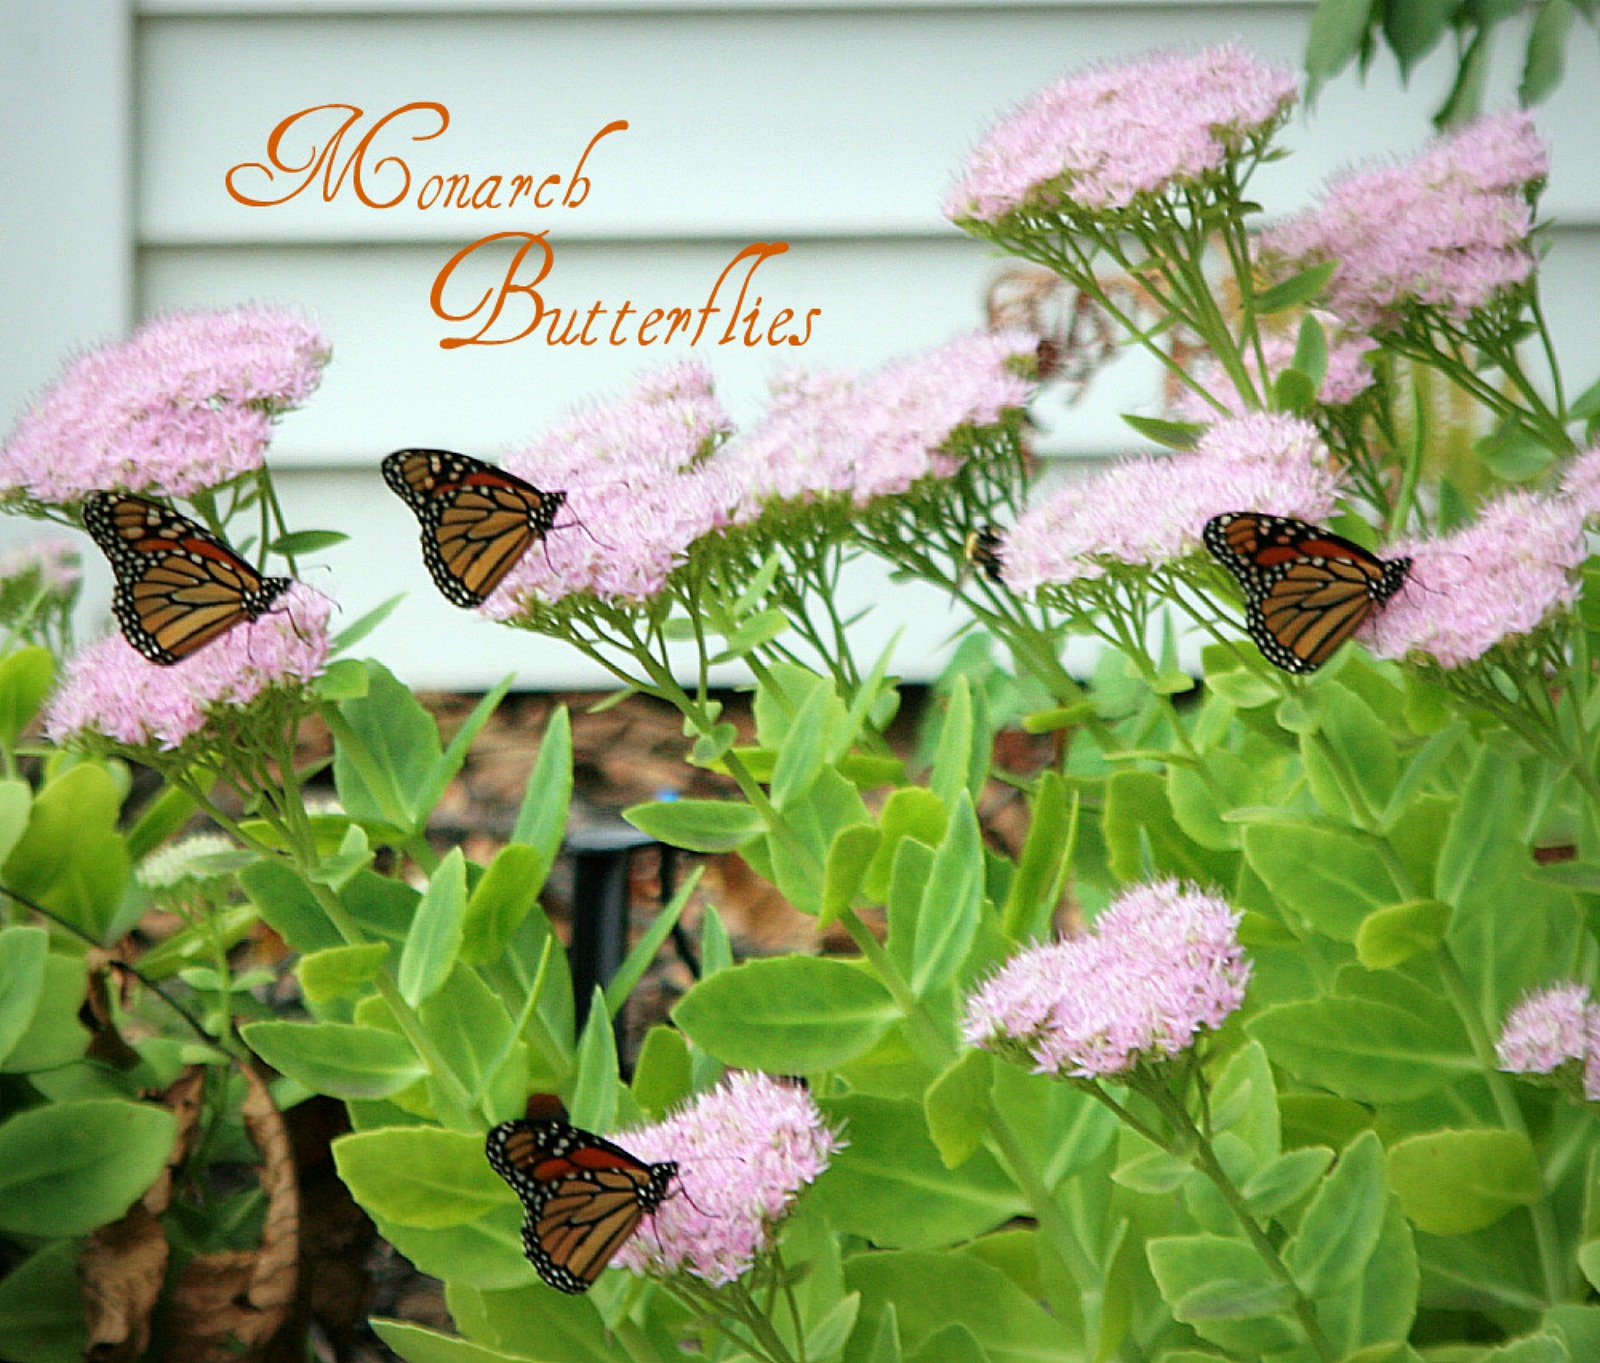 Monarch butterflies visit blooming perennial sedum plant, fueling up before their annual journey, flying thousands of miles to overwintering in Mexico.